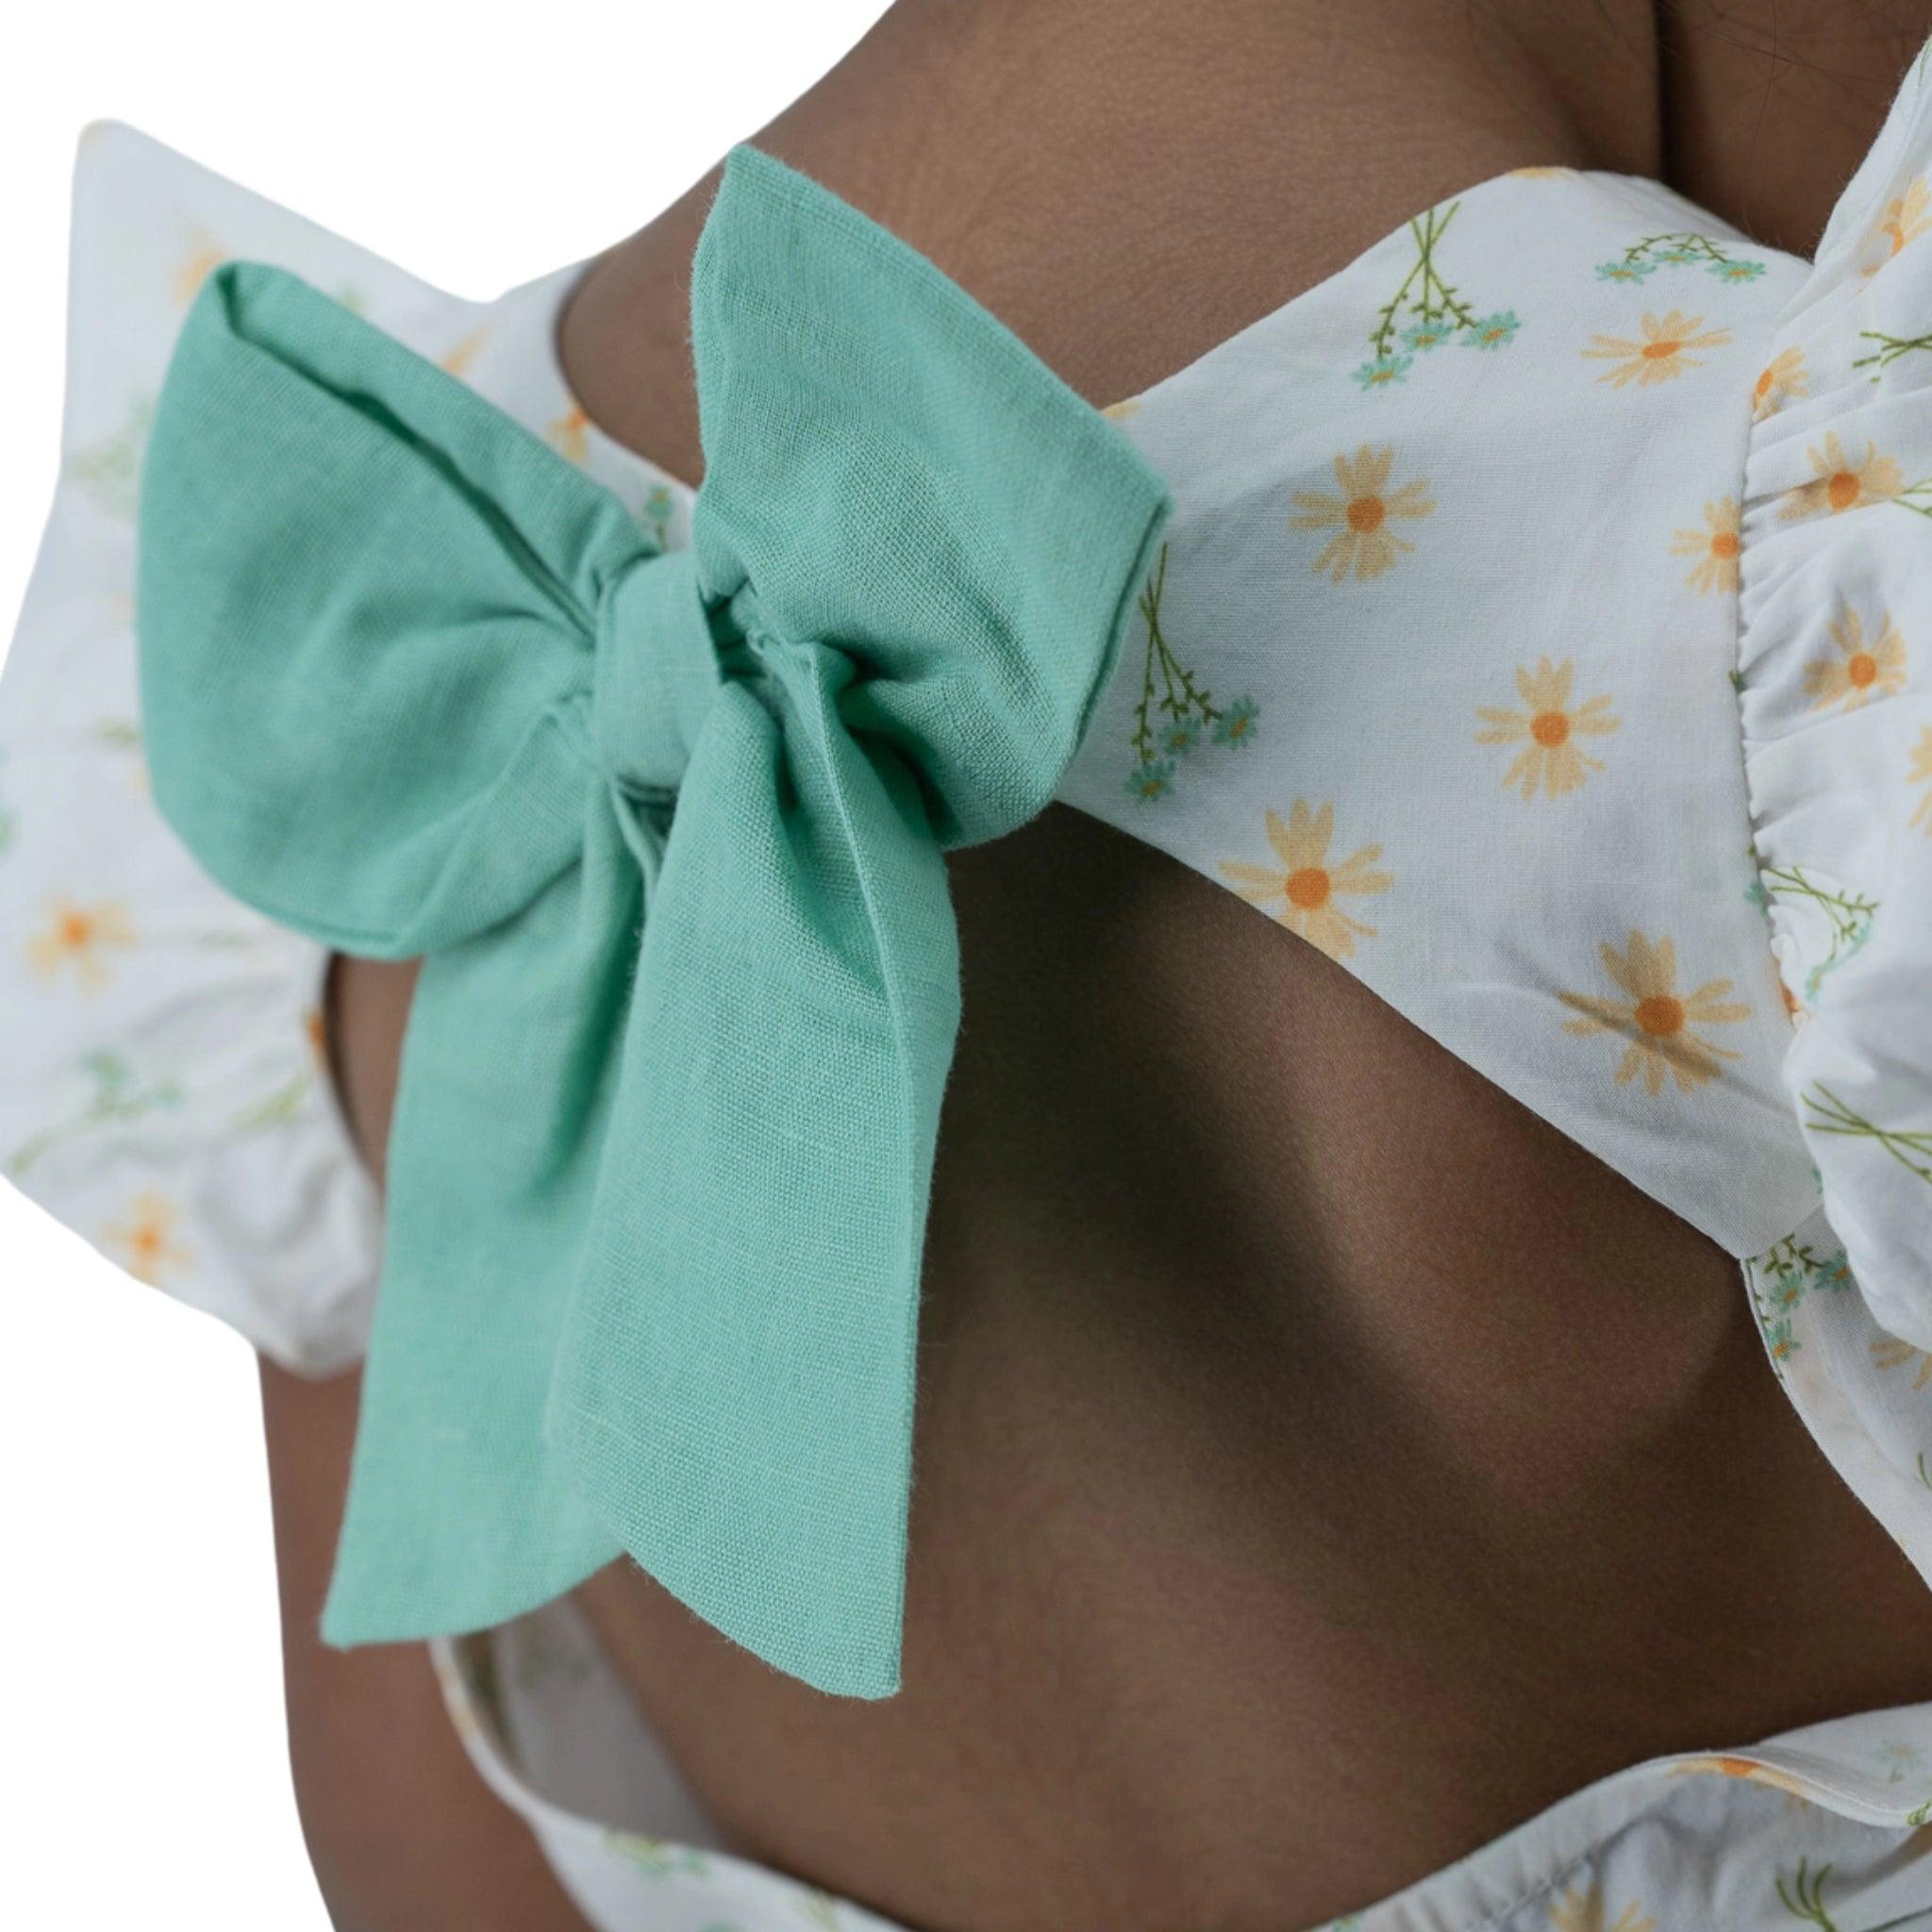 Close-up of a person wearing a Karee Petite Blossom Cotton Dress in Smoked Pearl with yellow floral print and a large green bow on the back.